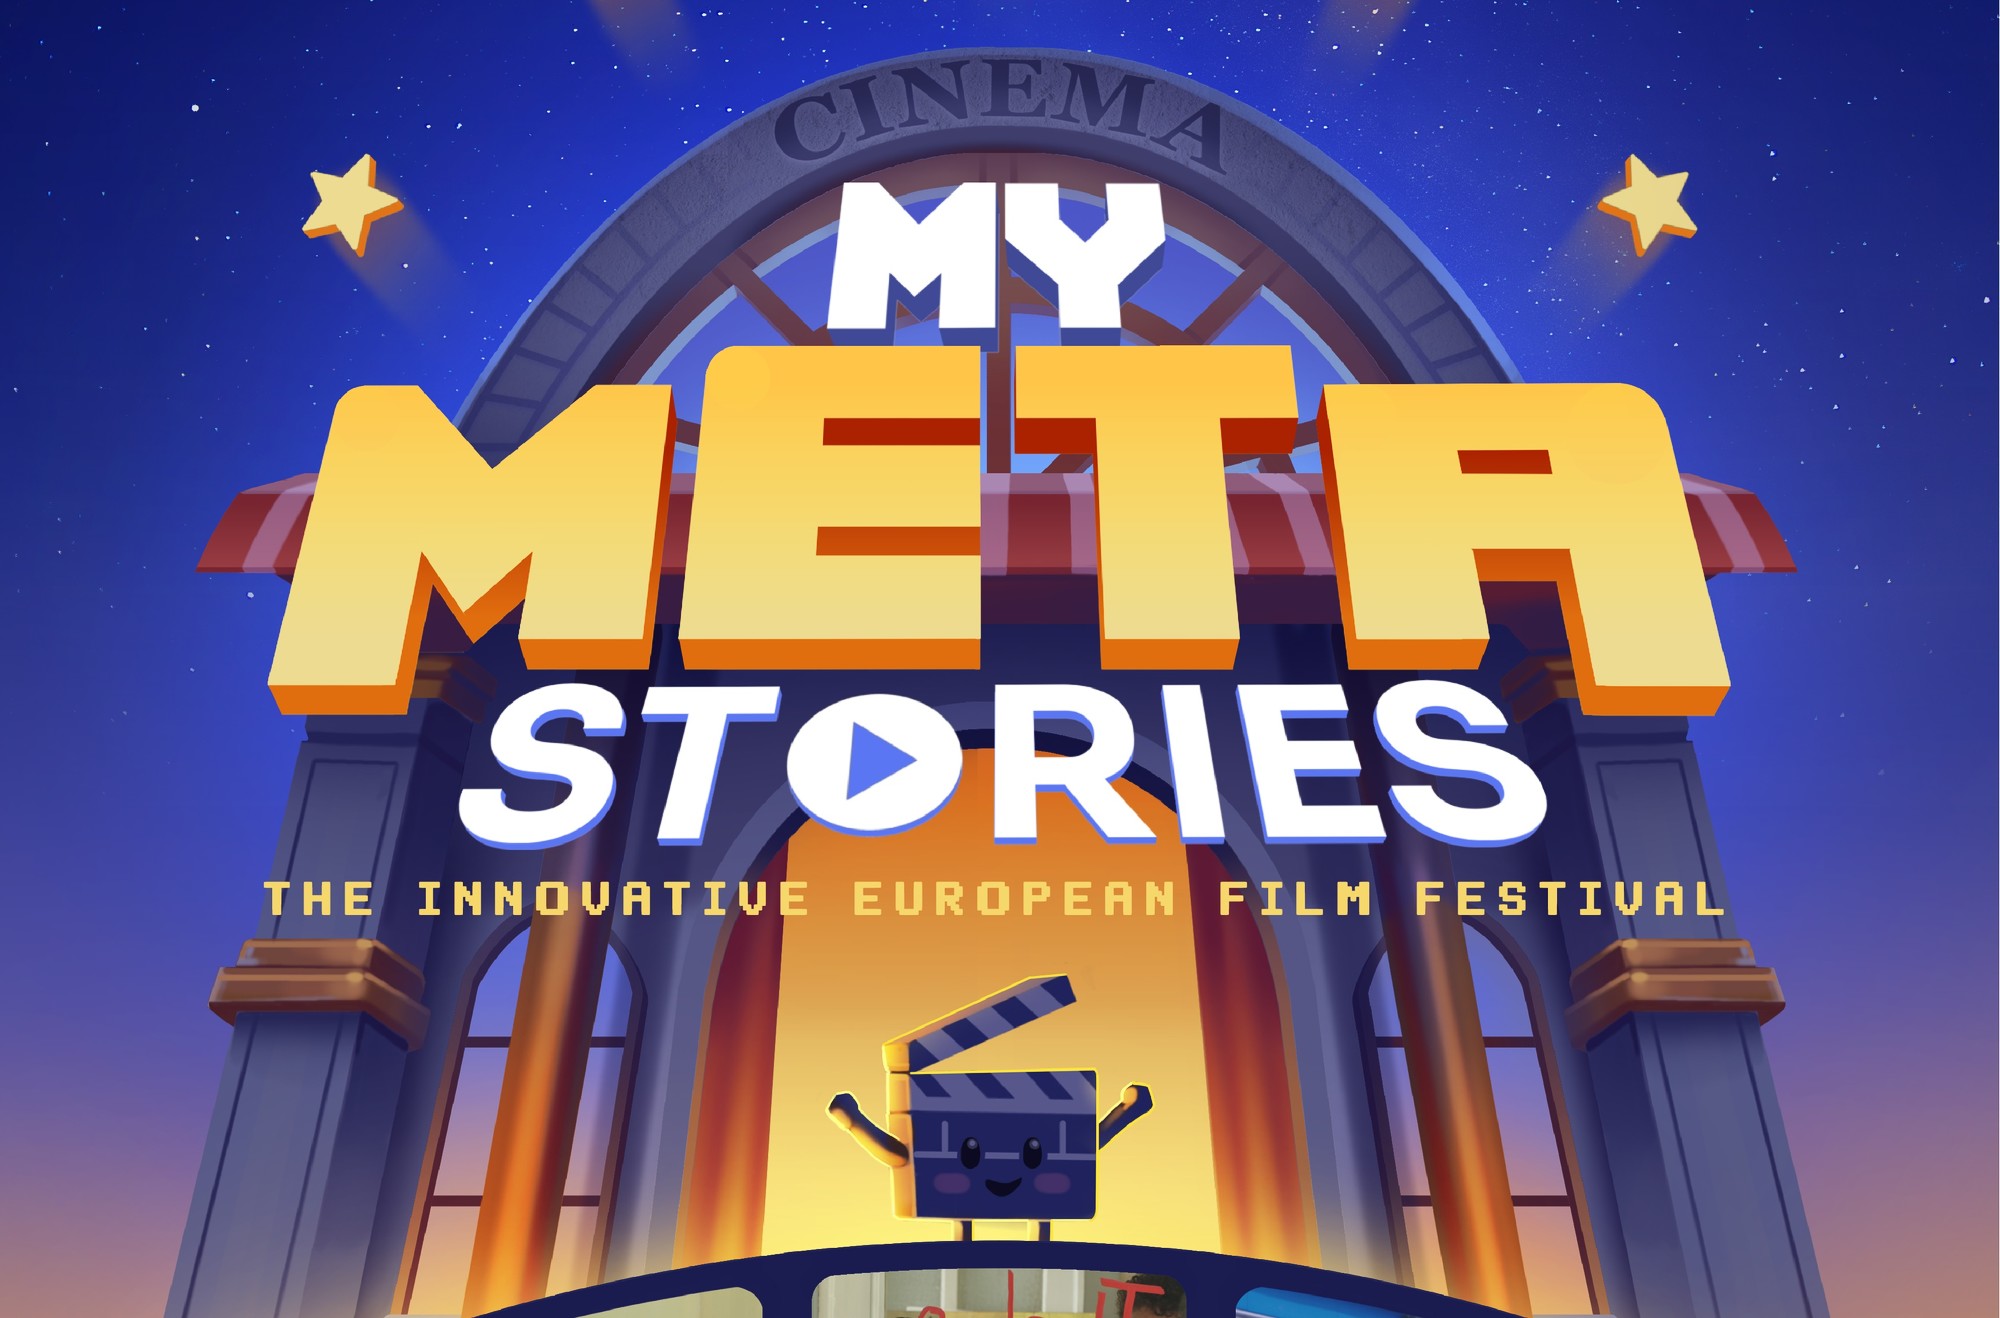 Unifrance innovates with MyMetaStories – Cineuropa